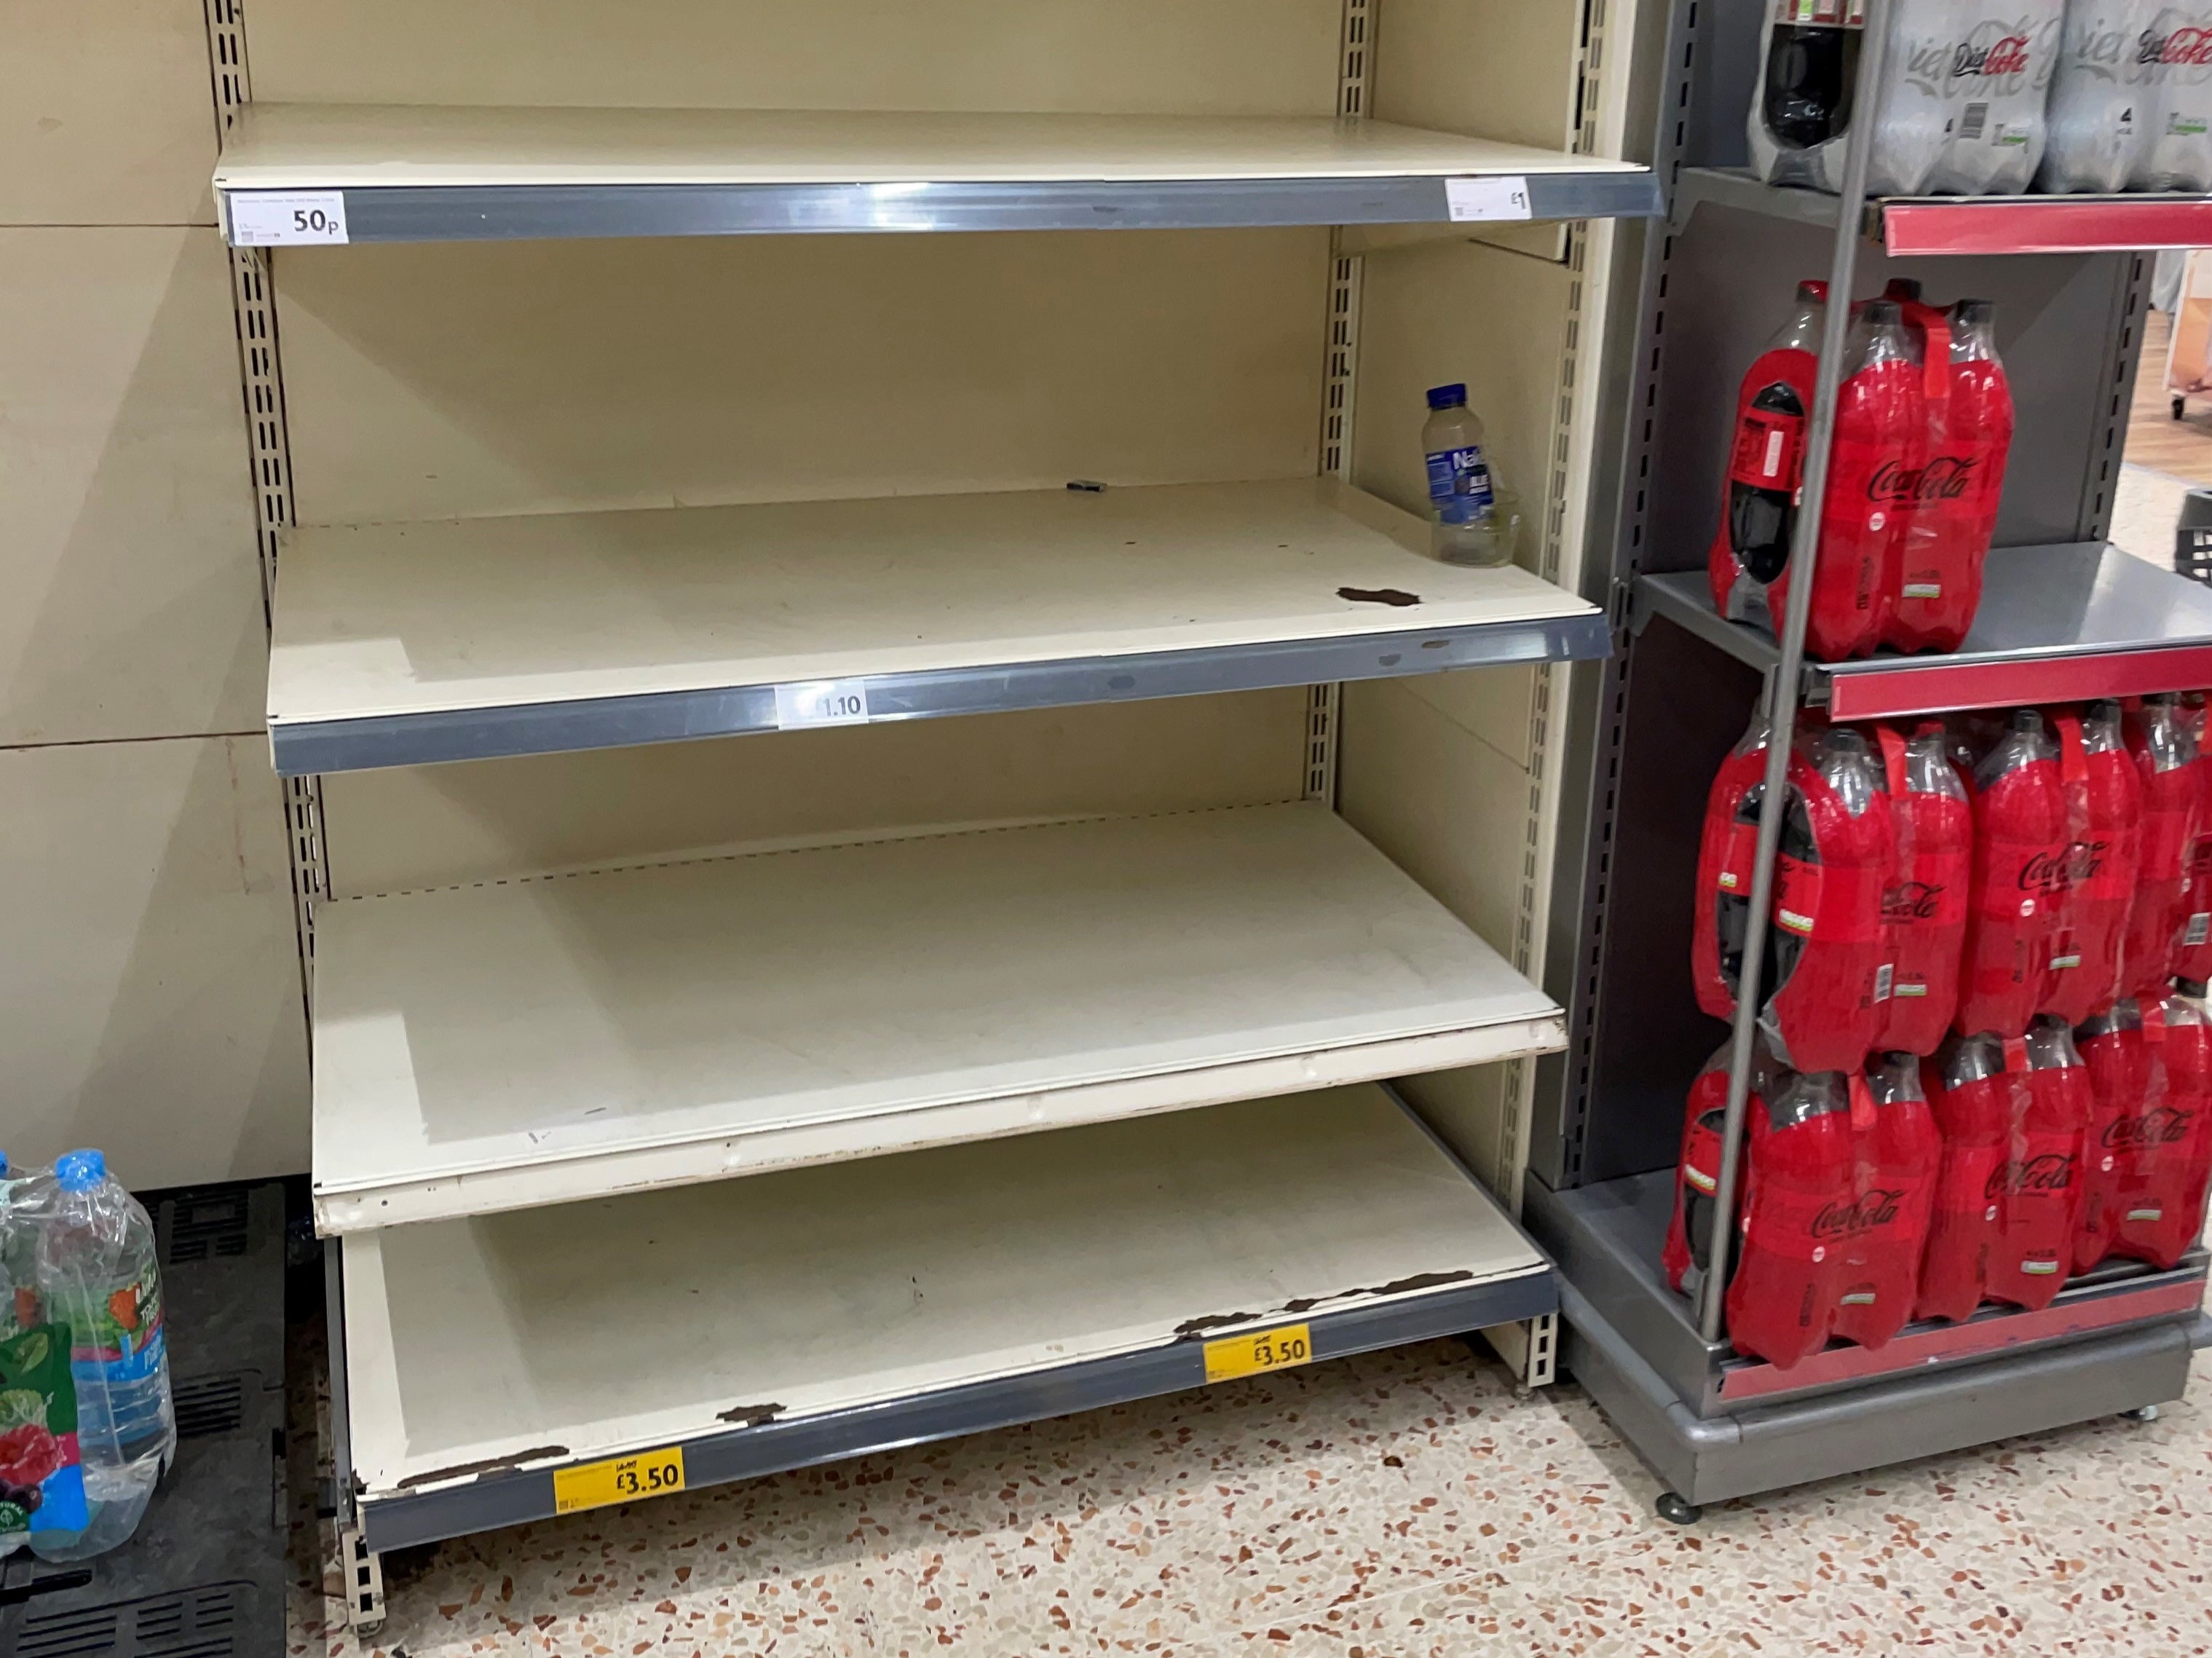 Empty shelves at Morrisons in BelleVale, Liverpool. Deliveries to supermarkets and other businesses across the UK are facing a growing shortage of drivers with many self-isolating